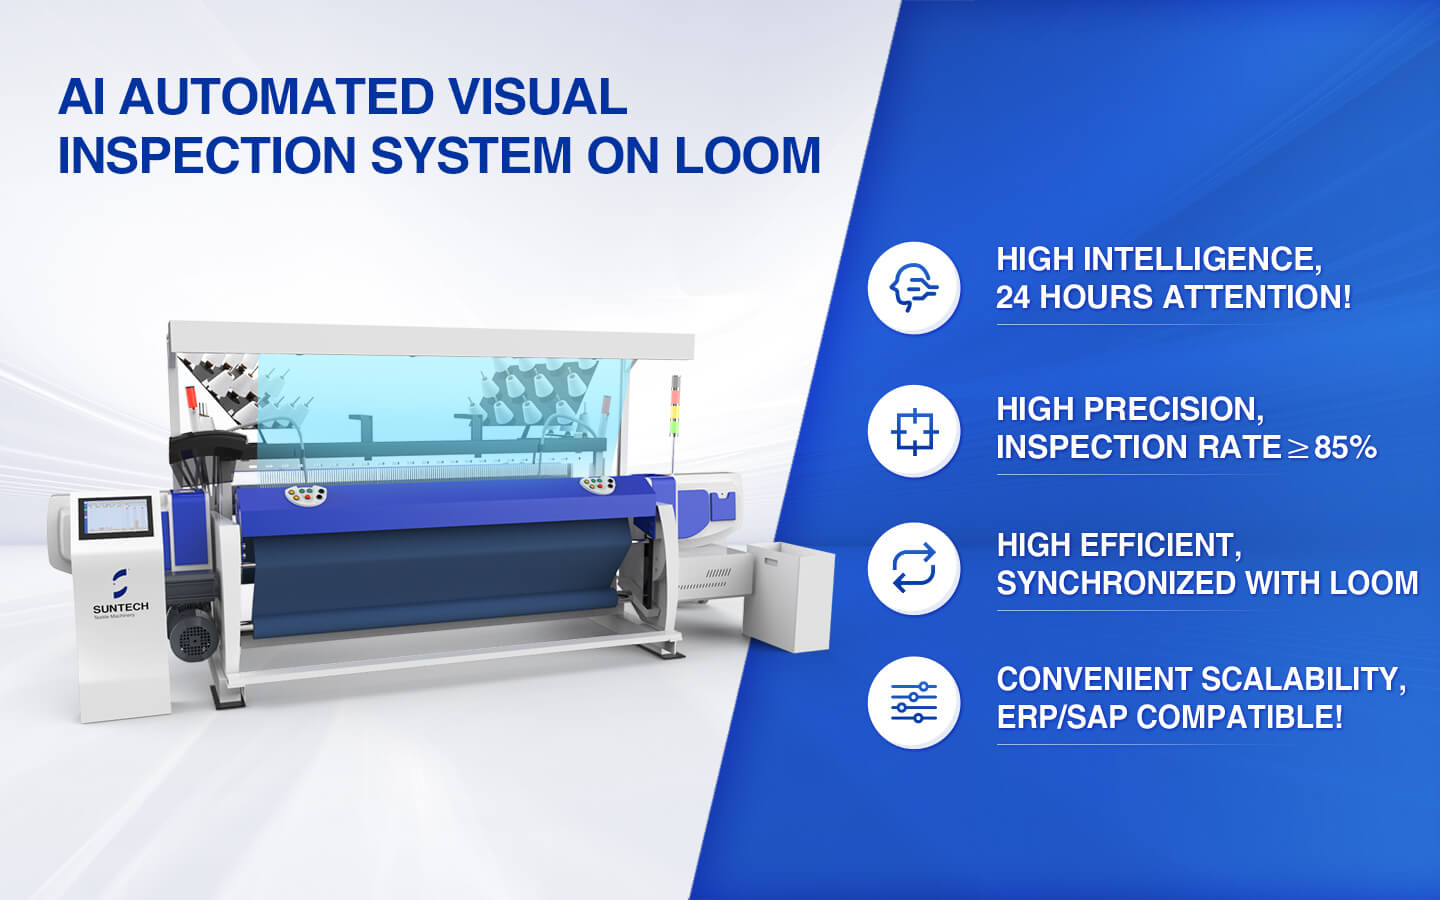 AI Automated Visual Inspection System on loom features